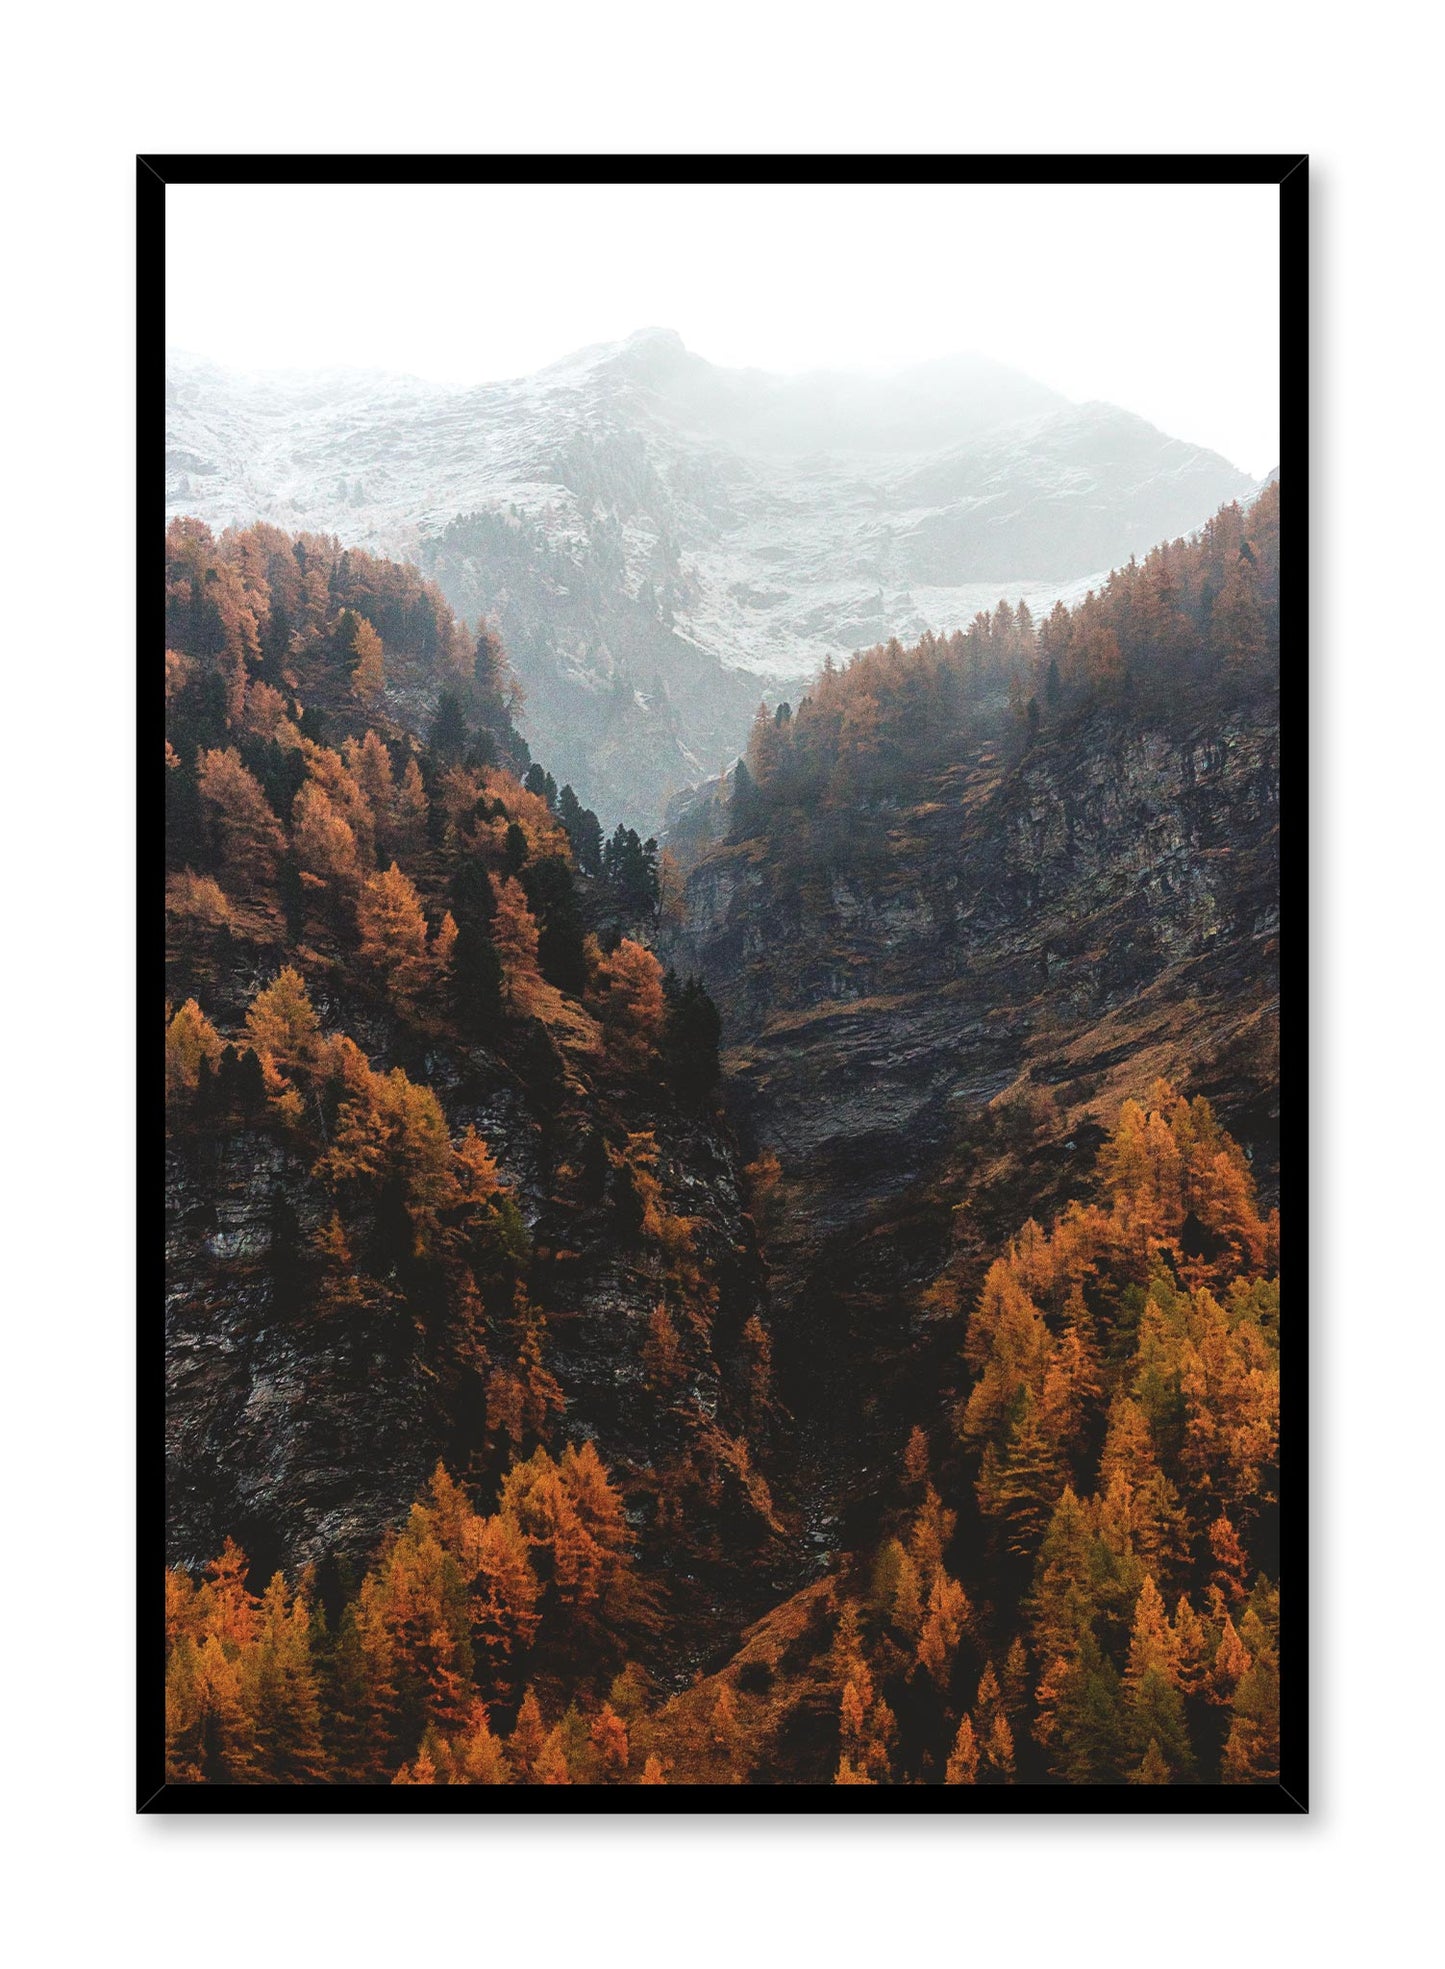 Hike Reward is a minimalist photography by Opposite Wall of a view overlooking mountains covered in orange leaves in the front and snow in the background.